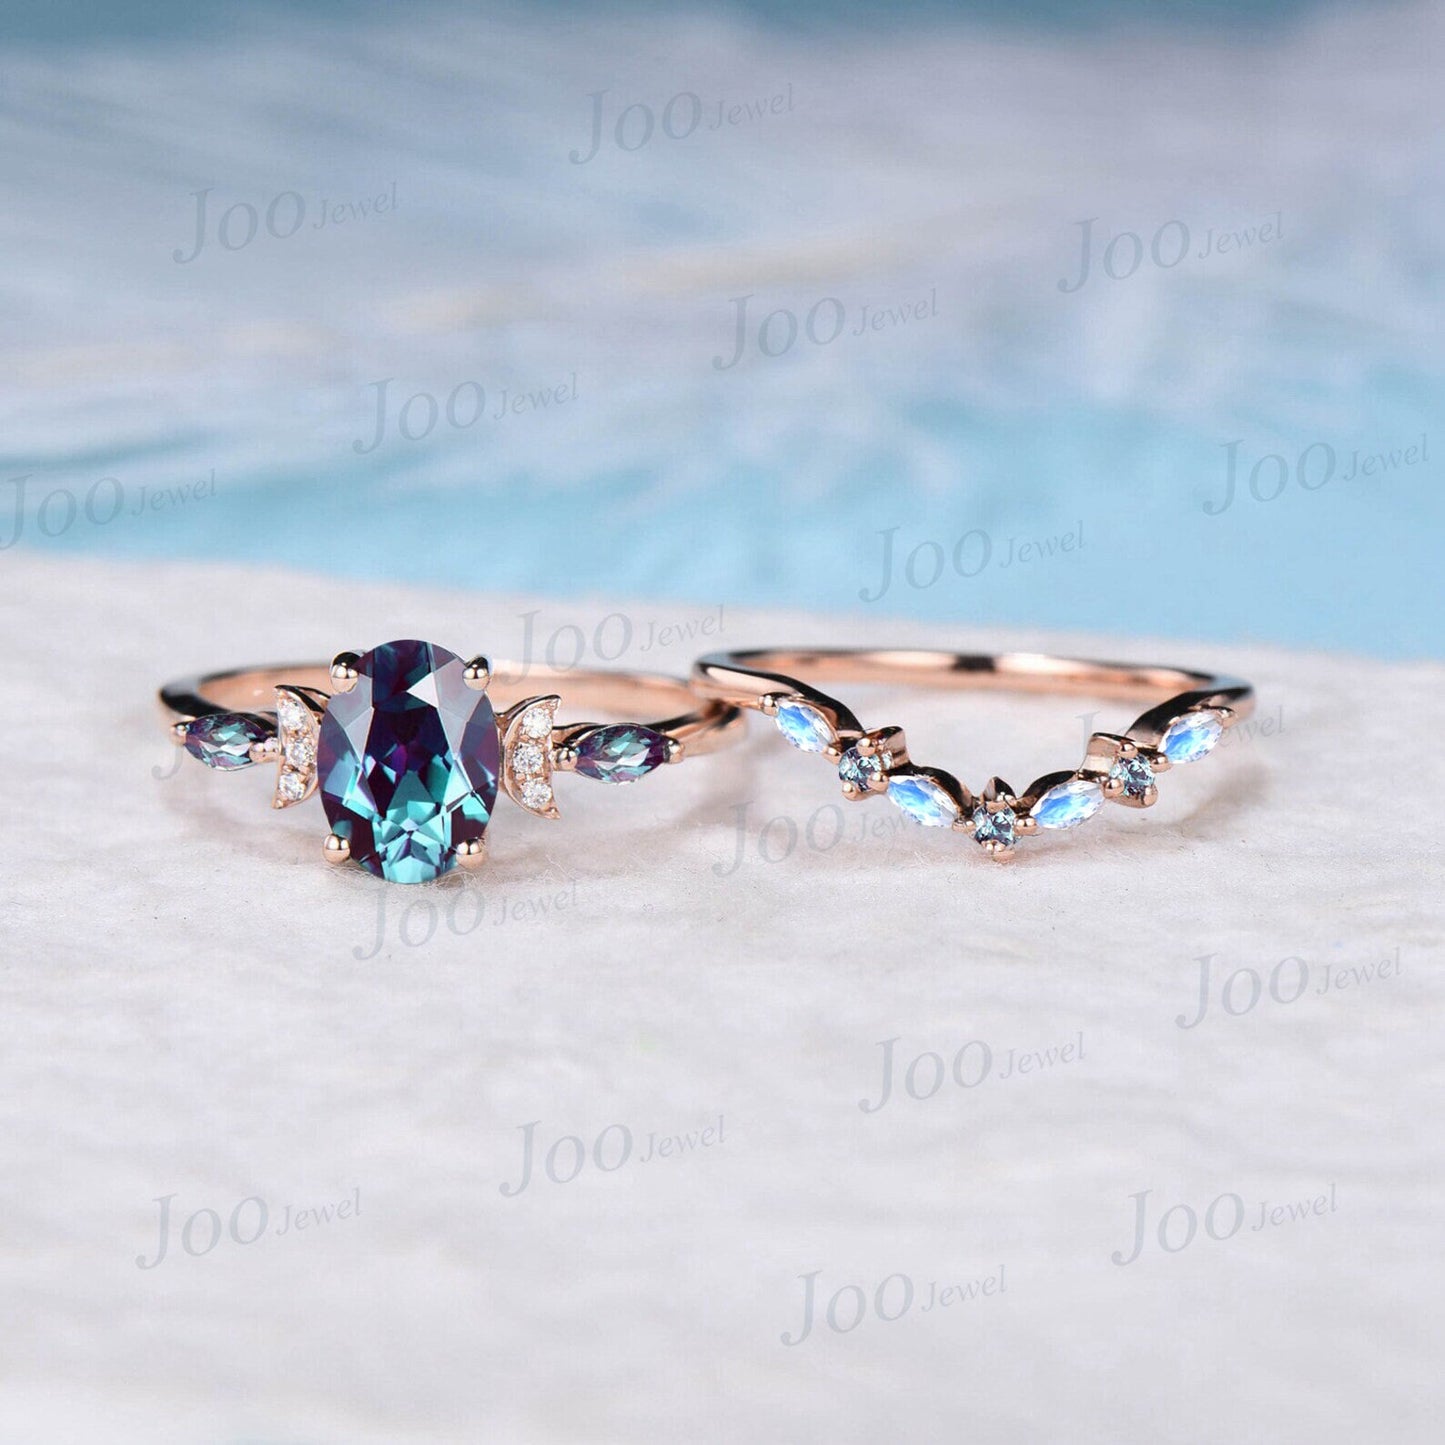 1.5ct Oval Cut Alexandrite Moonstone Ring Set June Birthstone Wedding Ring Moon Ring Unique Anniversary/Promise/Birthstone Gift for Women